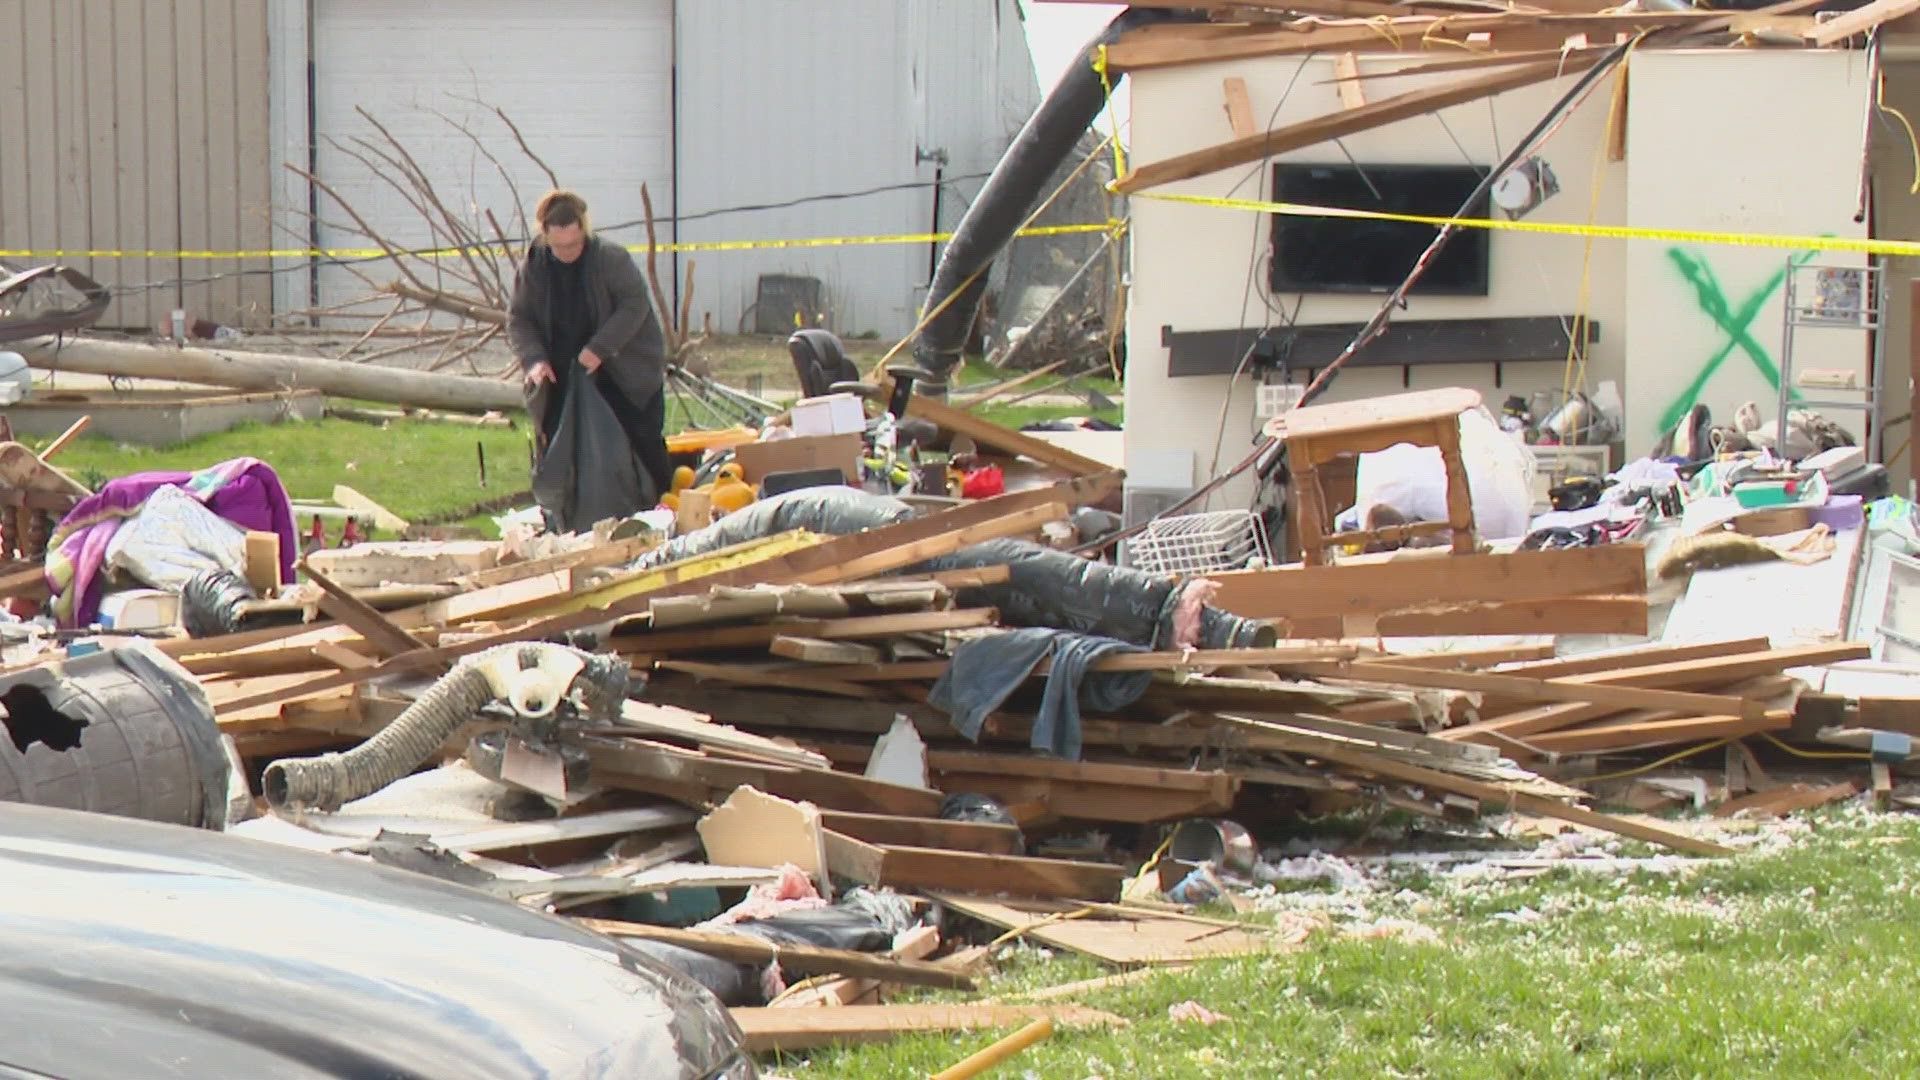 When more than 20 tornadoes rocked the state, people stepped up and stepped in to help the hardest hit areas recover.